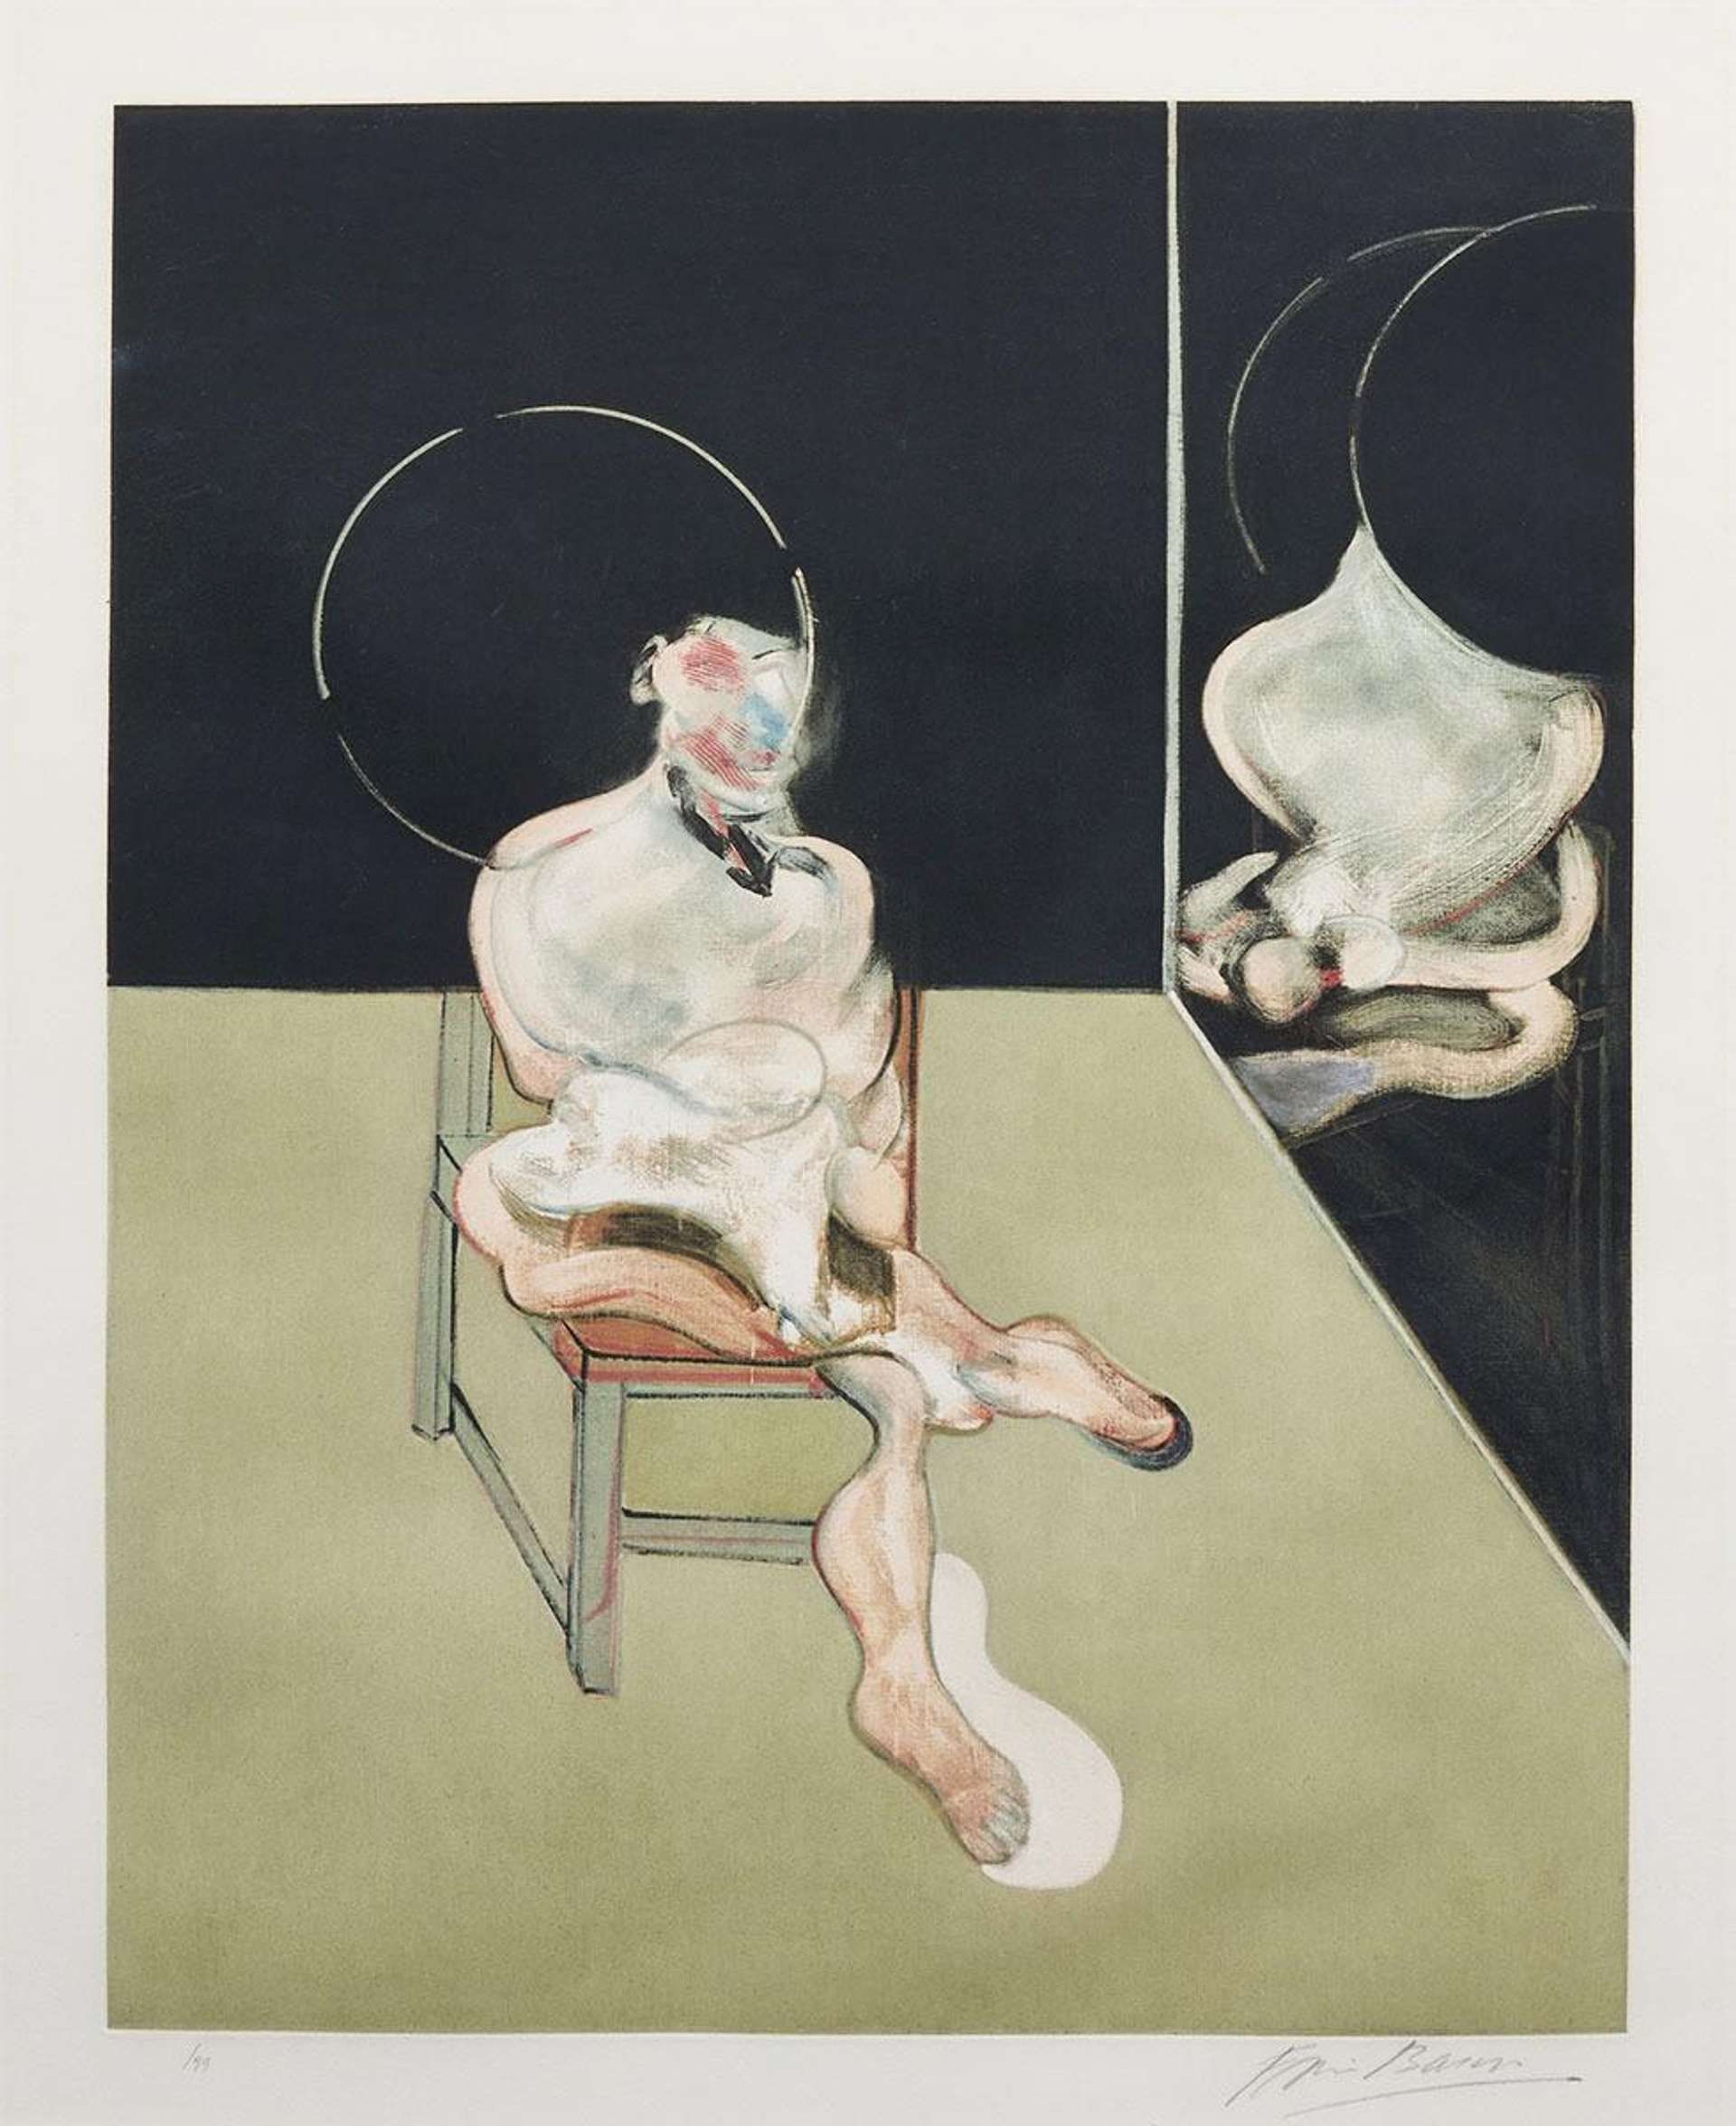 Seated Figure 1983 - Signed Print by Francis Bacon 1983 - MyArtBroker